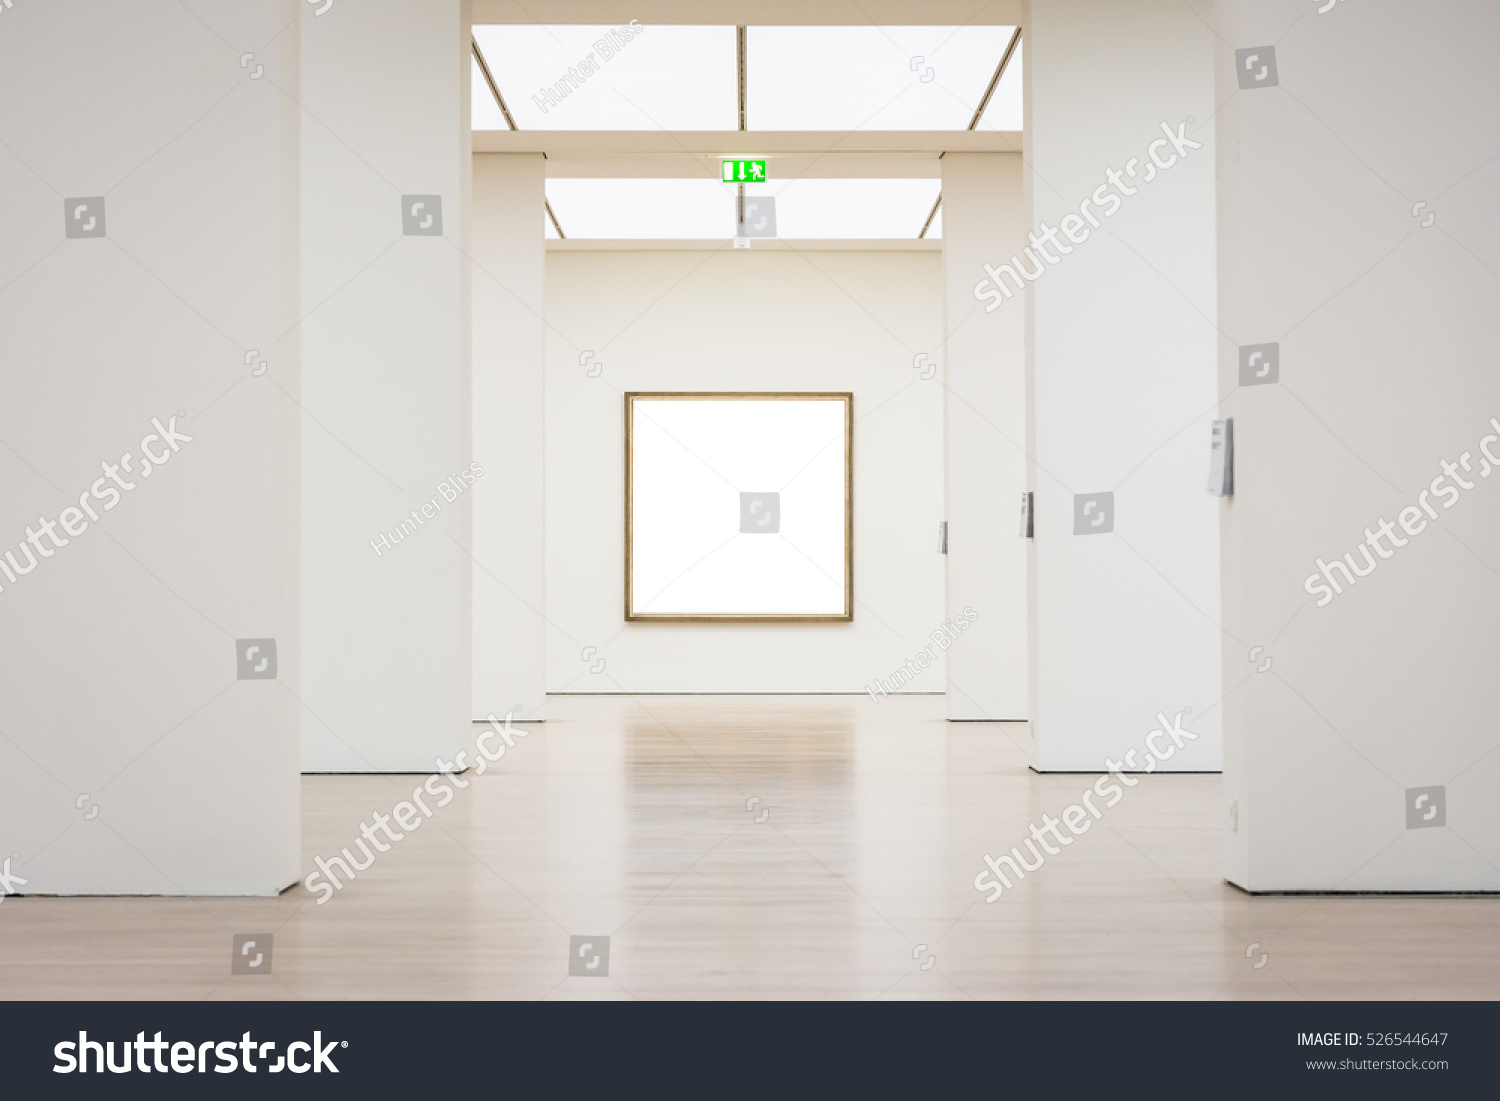 Modern Art Museum Frame Wall Clipping Path Isolated White Vector Illustration Template #526544647